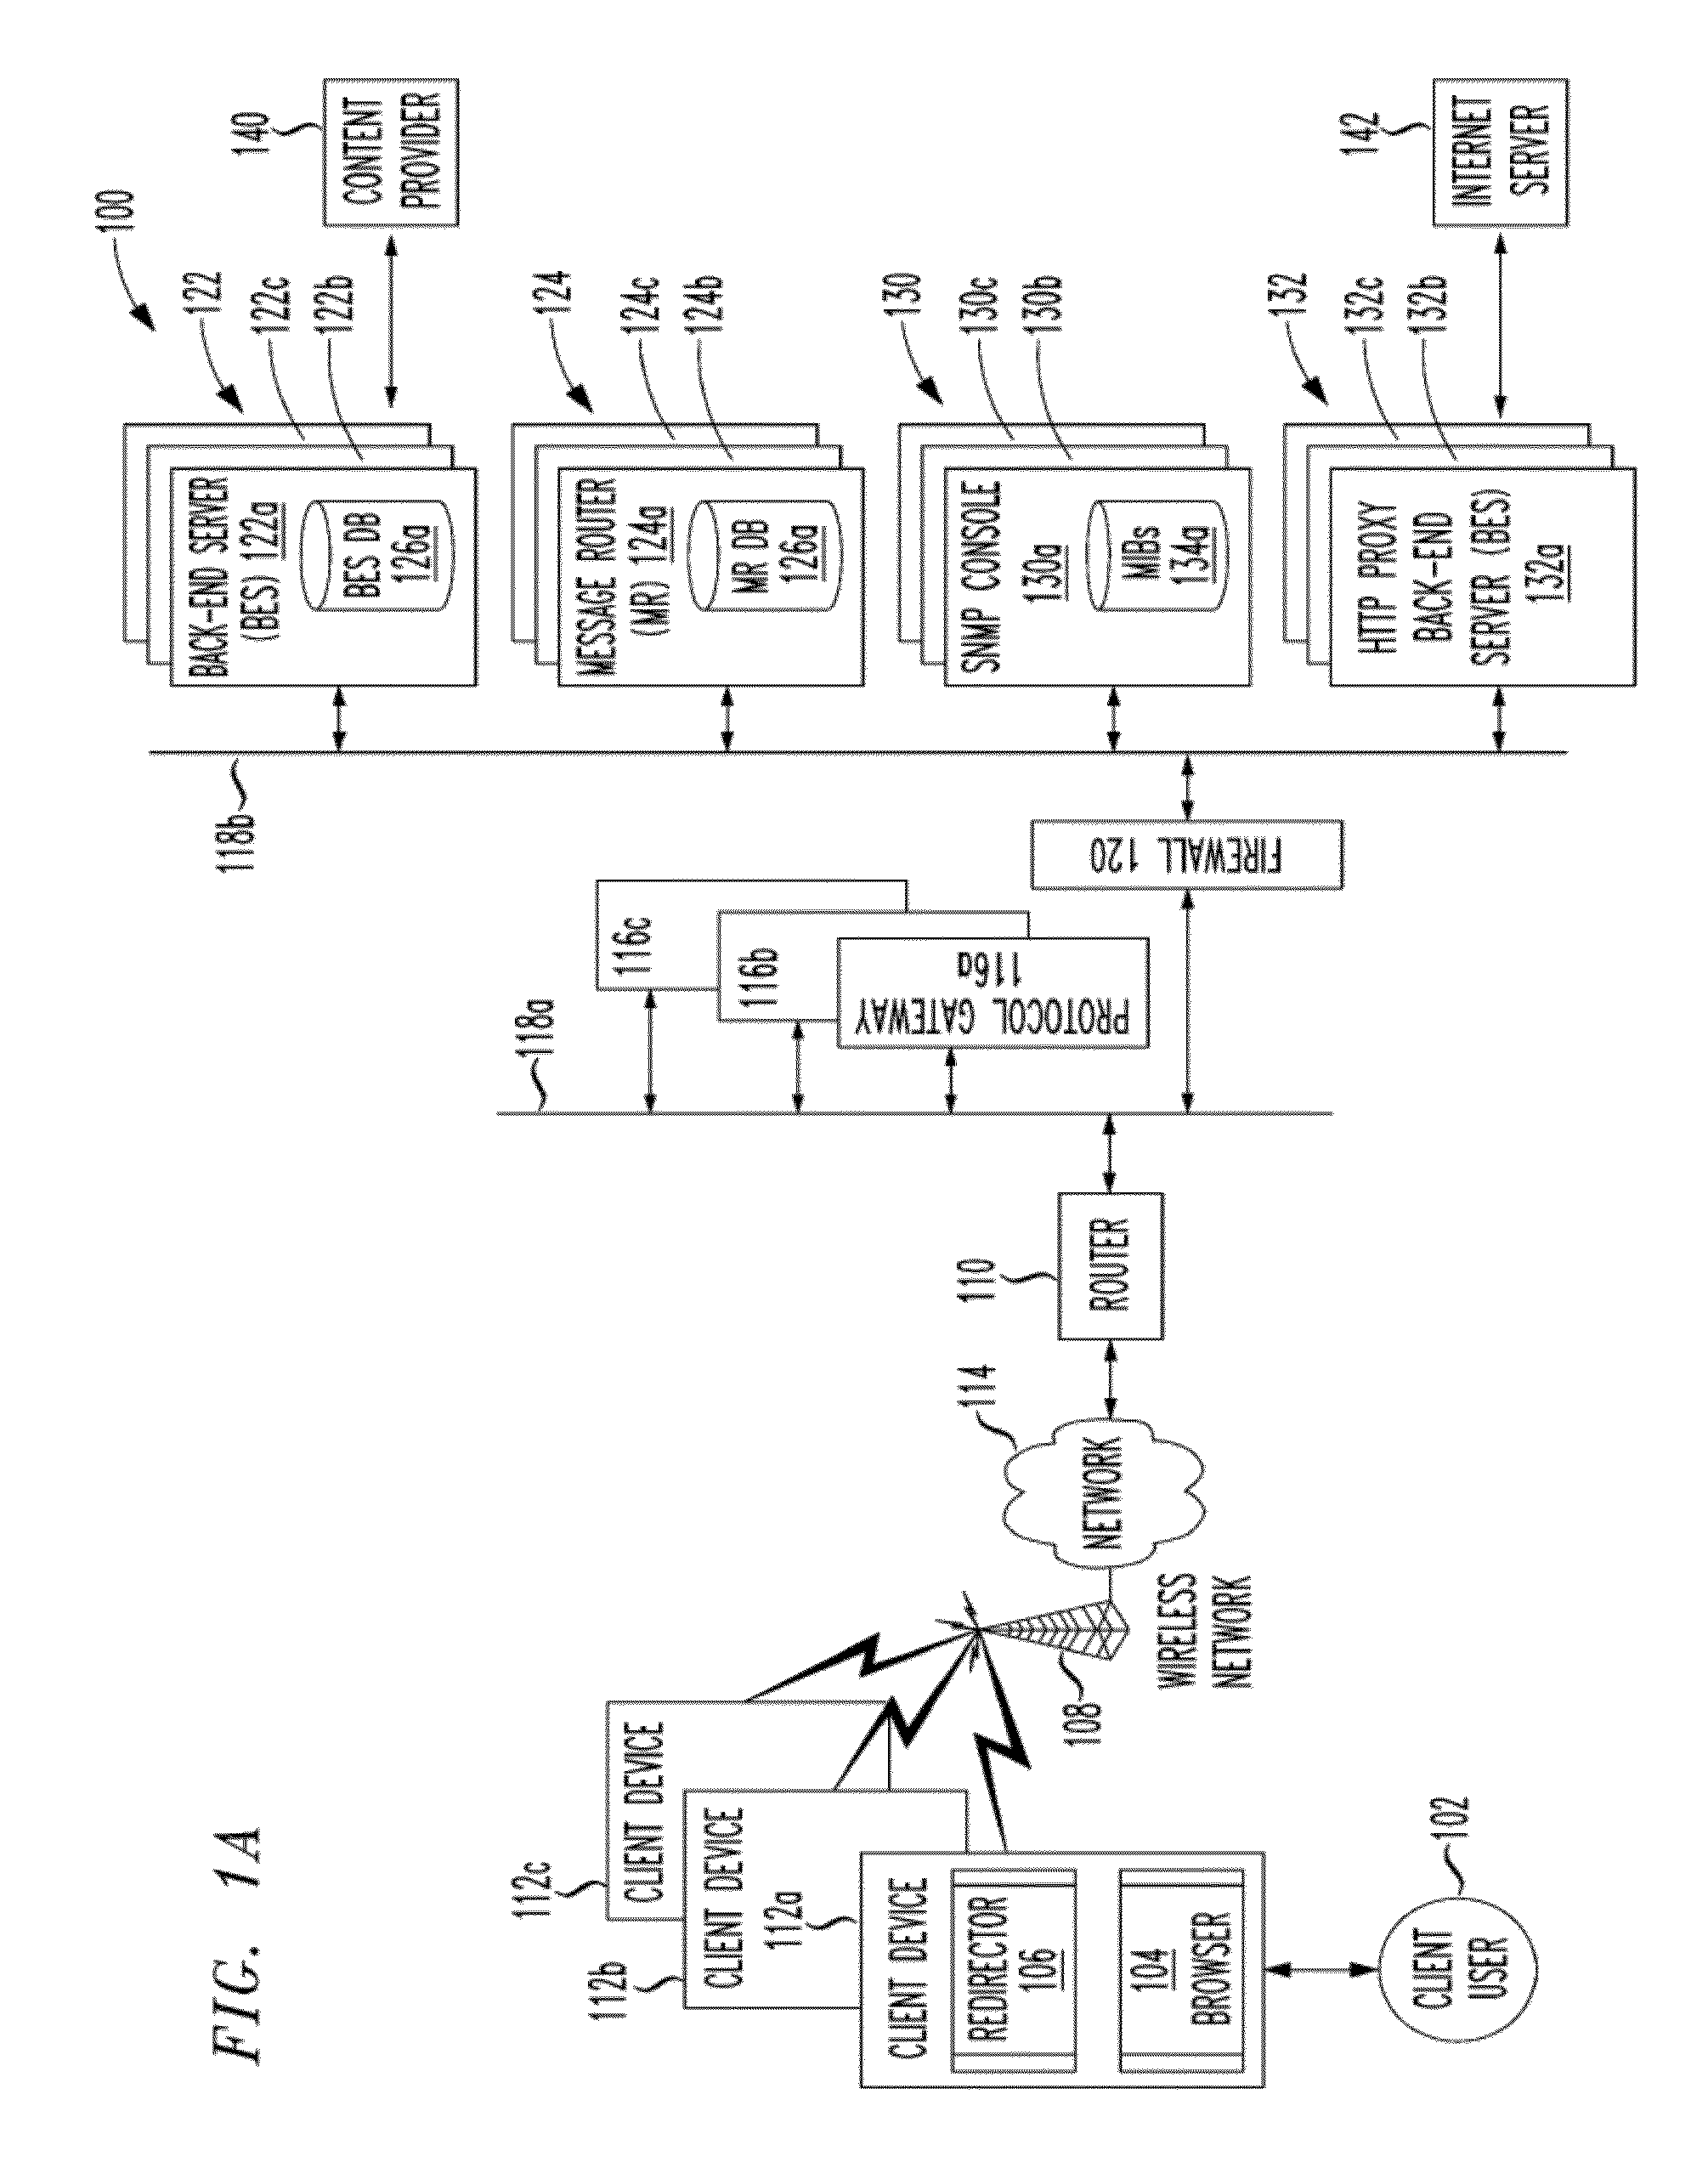 System and method for servers to send alerts to connectionless devices